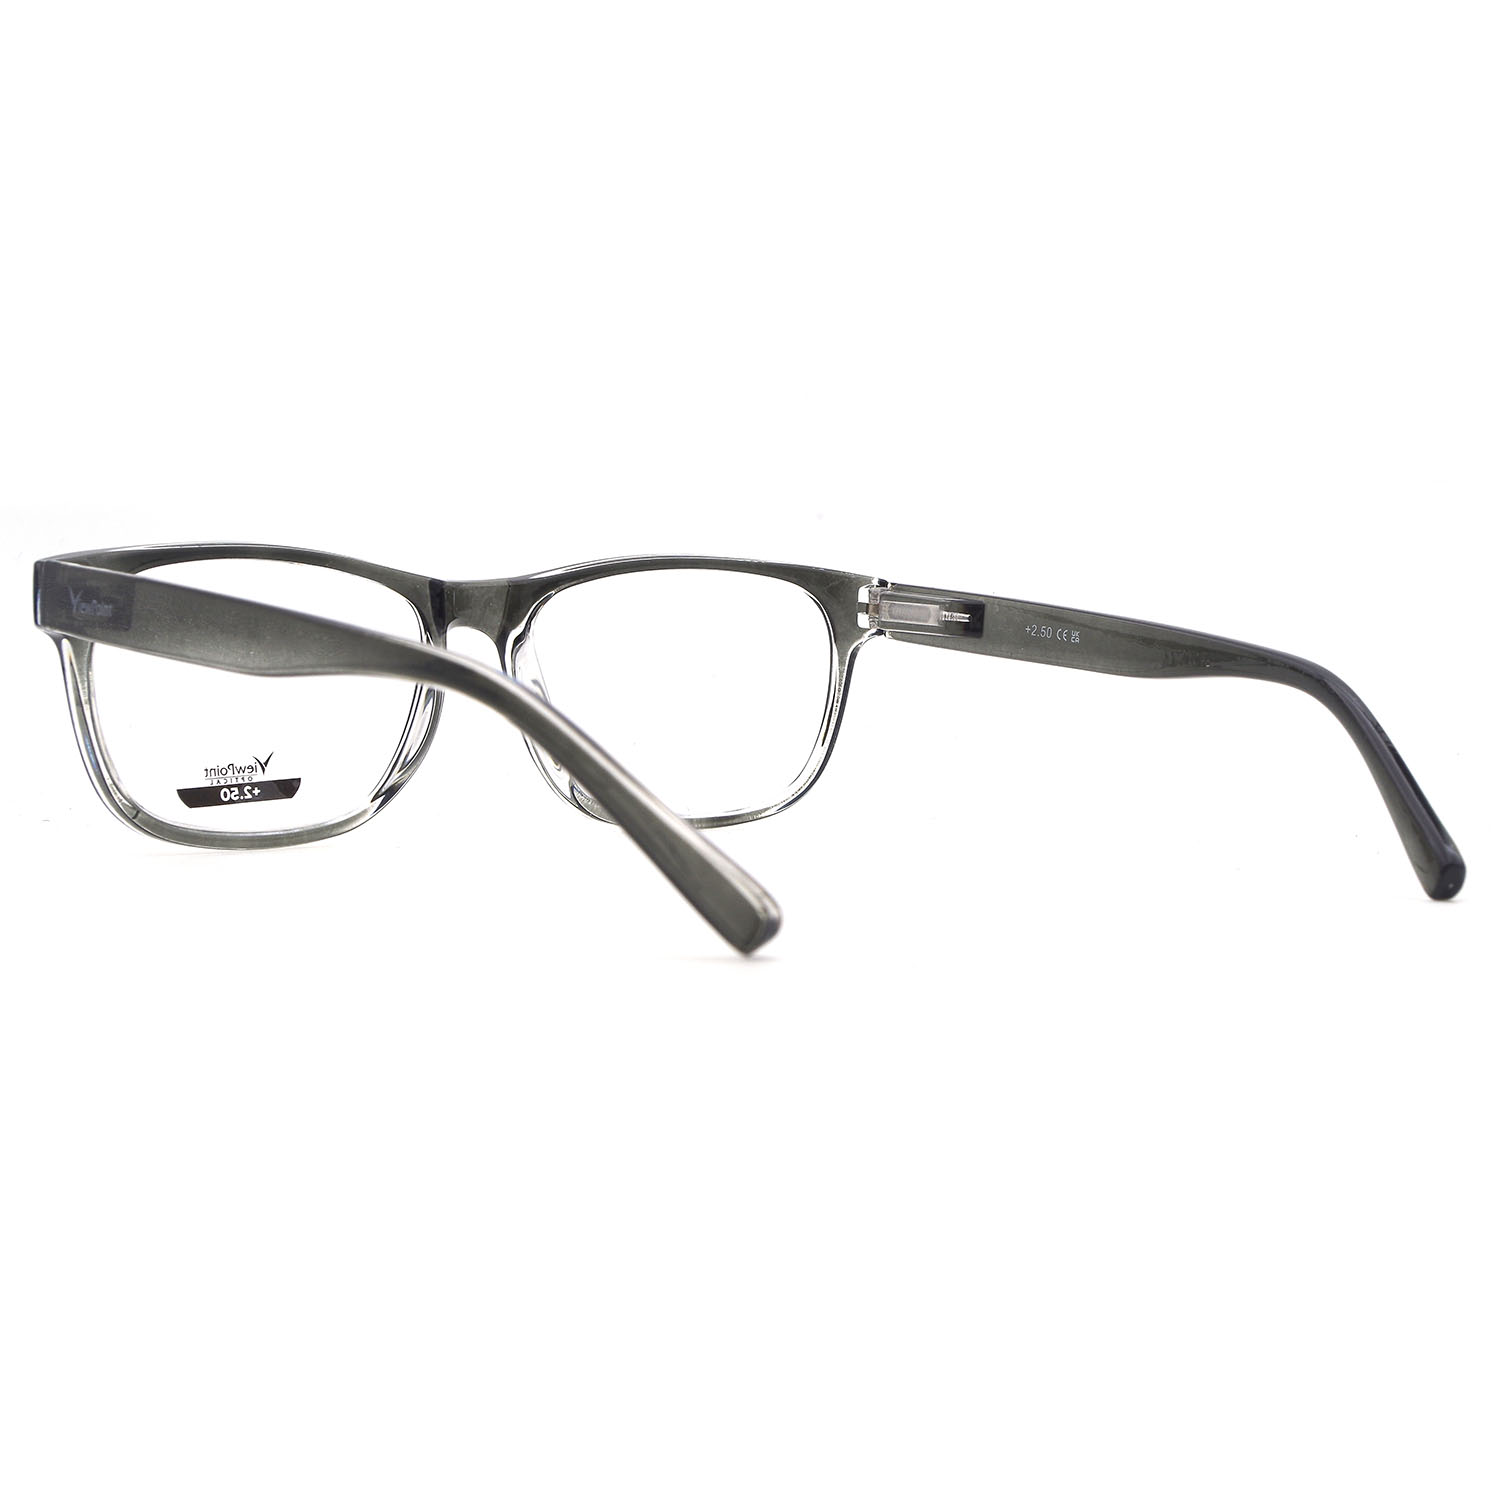 Grey Reading Glasses UK | Cheap Grey Frame Ready Readers from £9